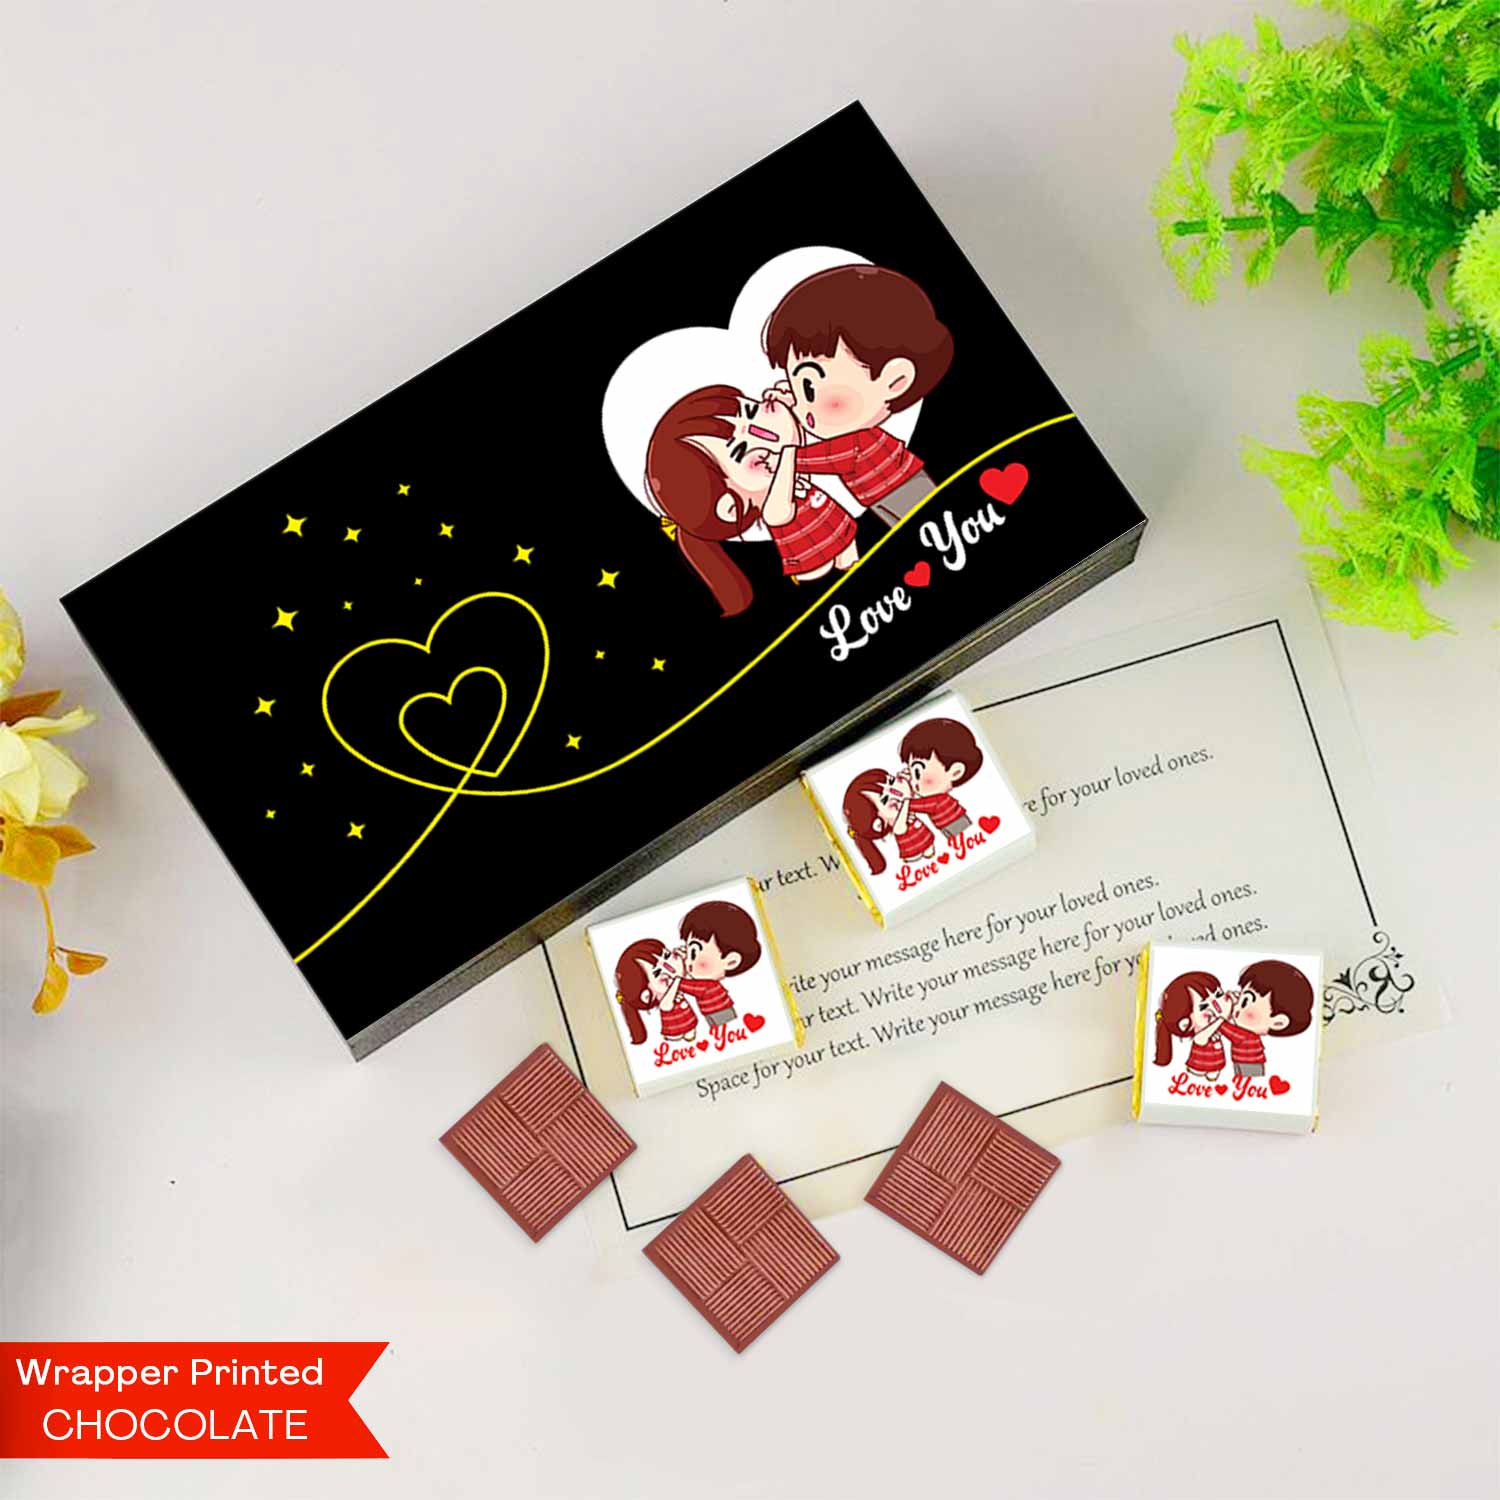  personalised chocolates personalized chocolate box personalised chocolate corporate gifts personalized chocolate gifts photo printed chocolate chocomanualart customized chocolate wrappers india chocolates for gift